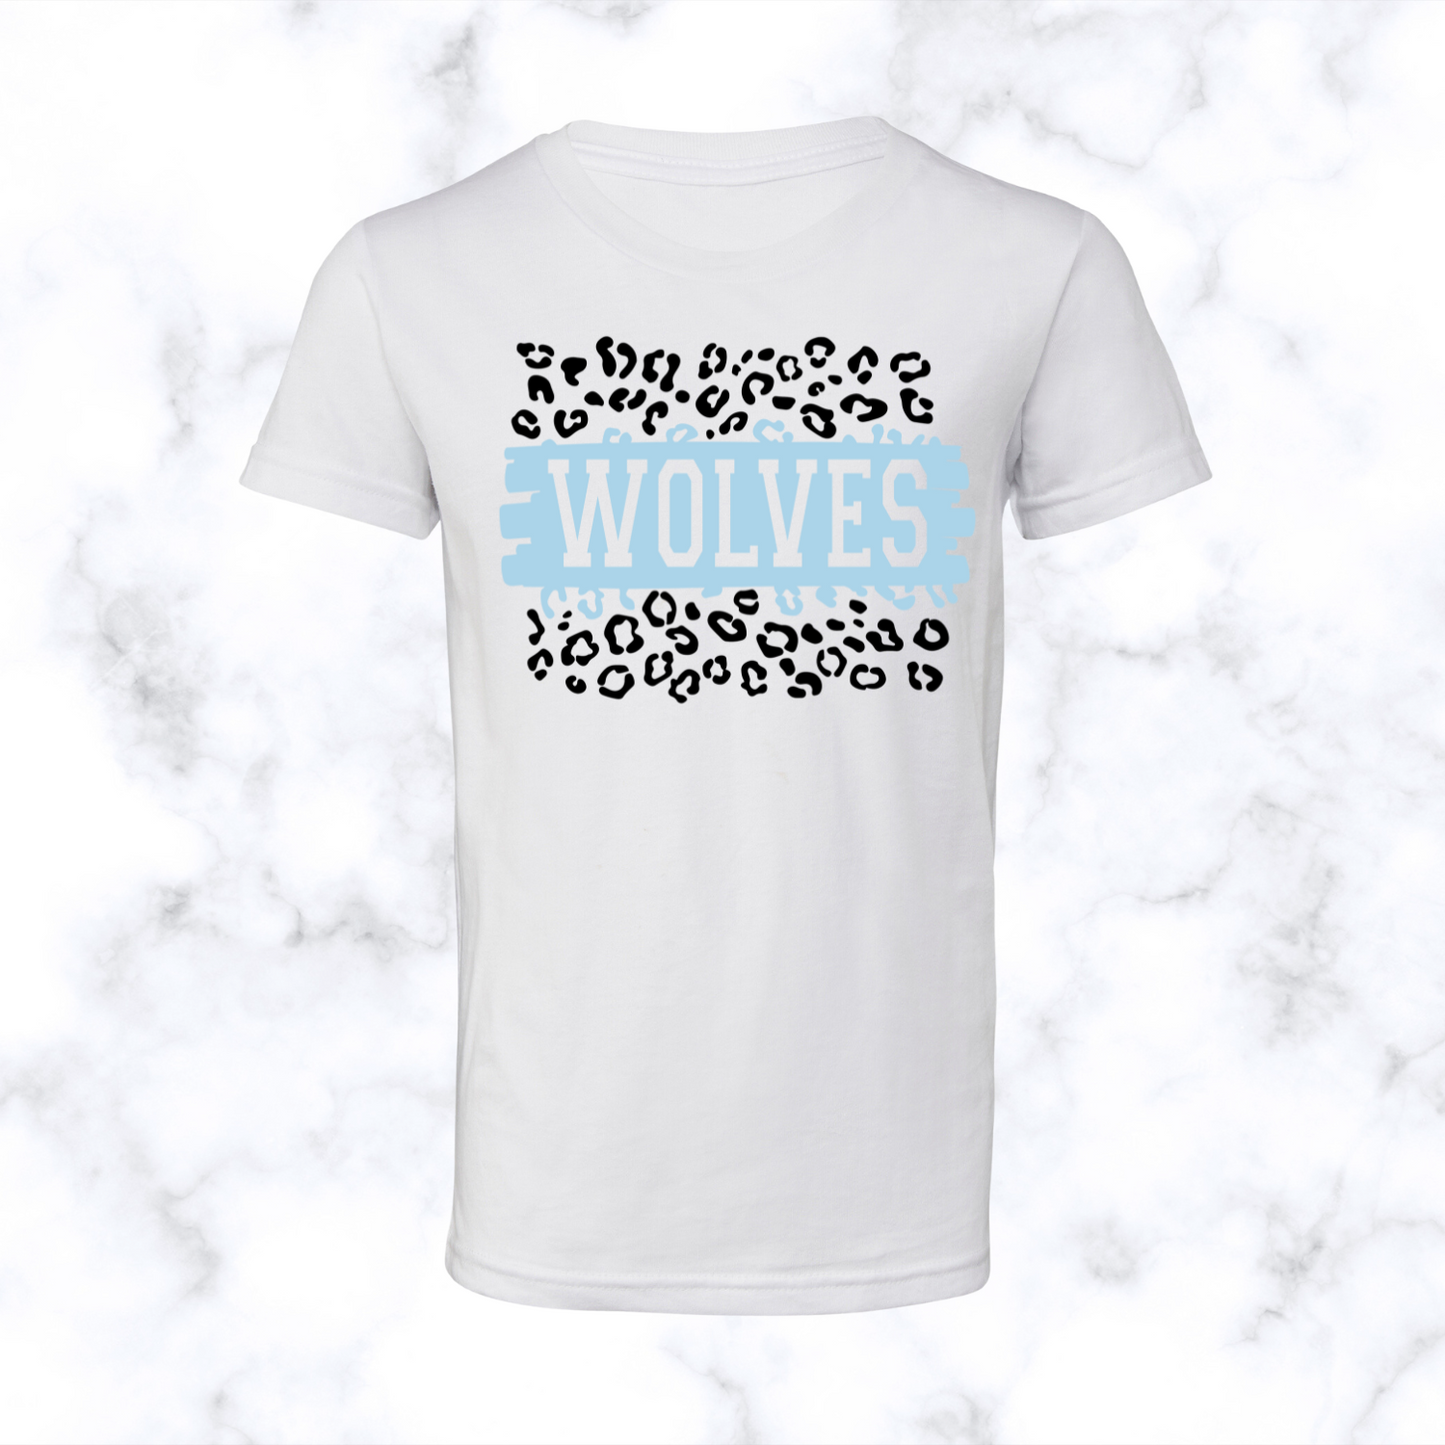 Wolves Leopard Tee Youth